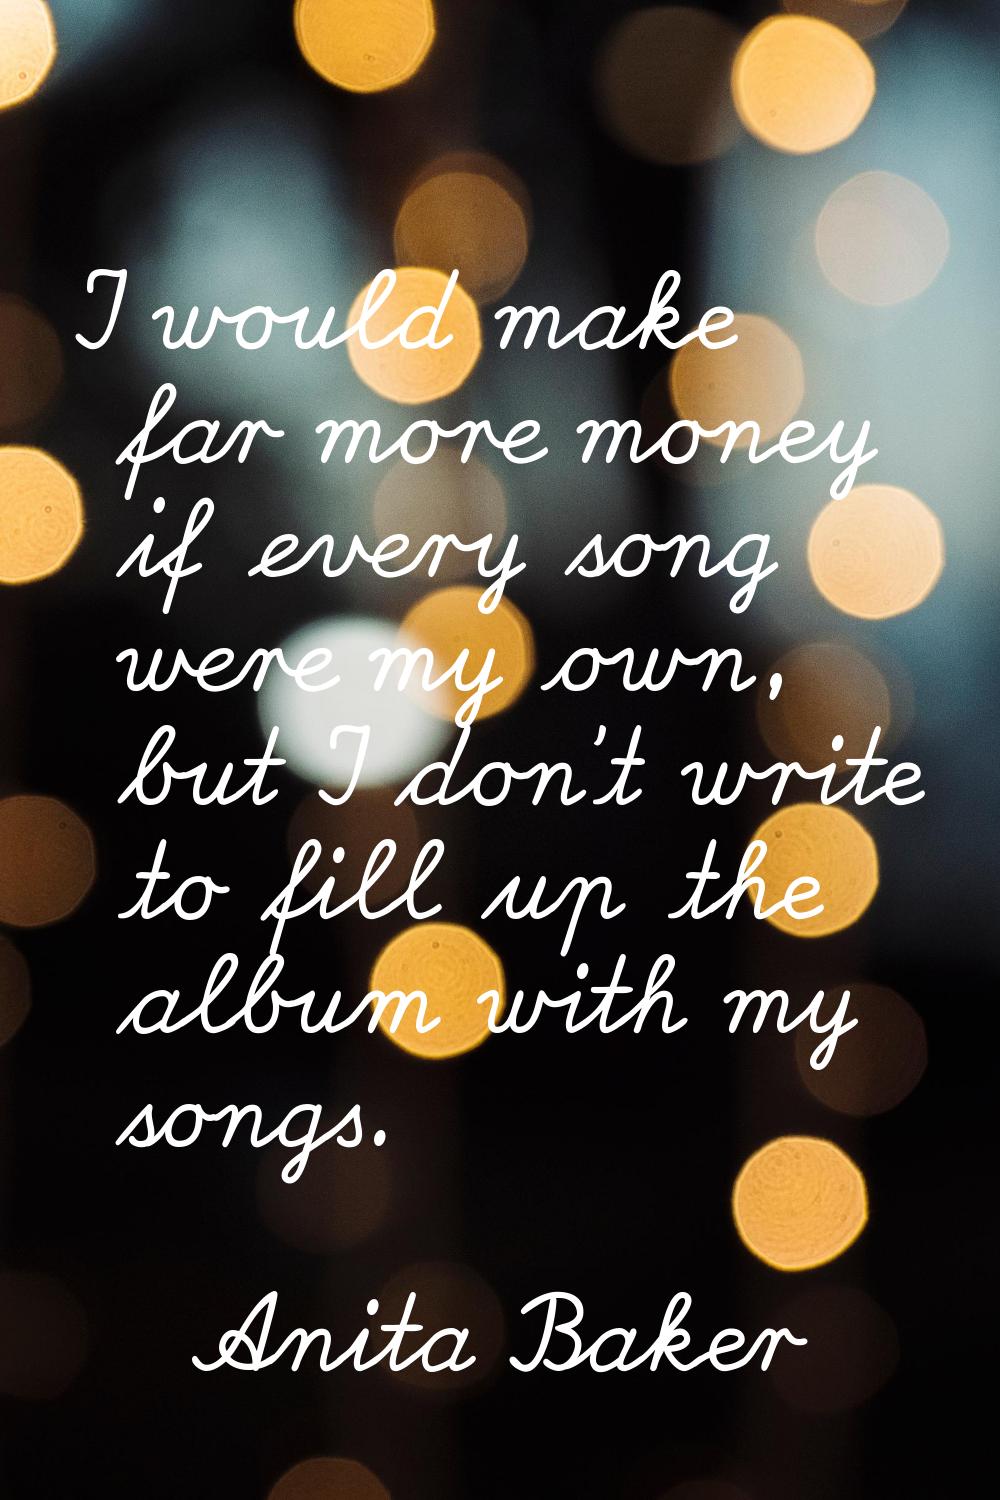 I would make far more money if every song were my own, but I don't write to fill up the album with 